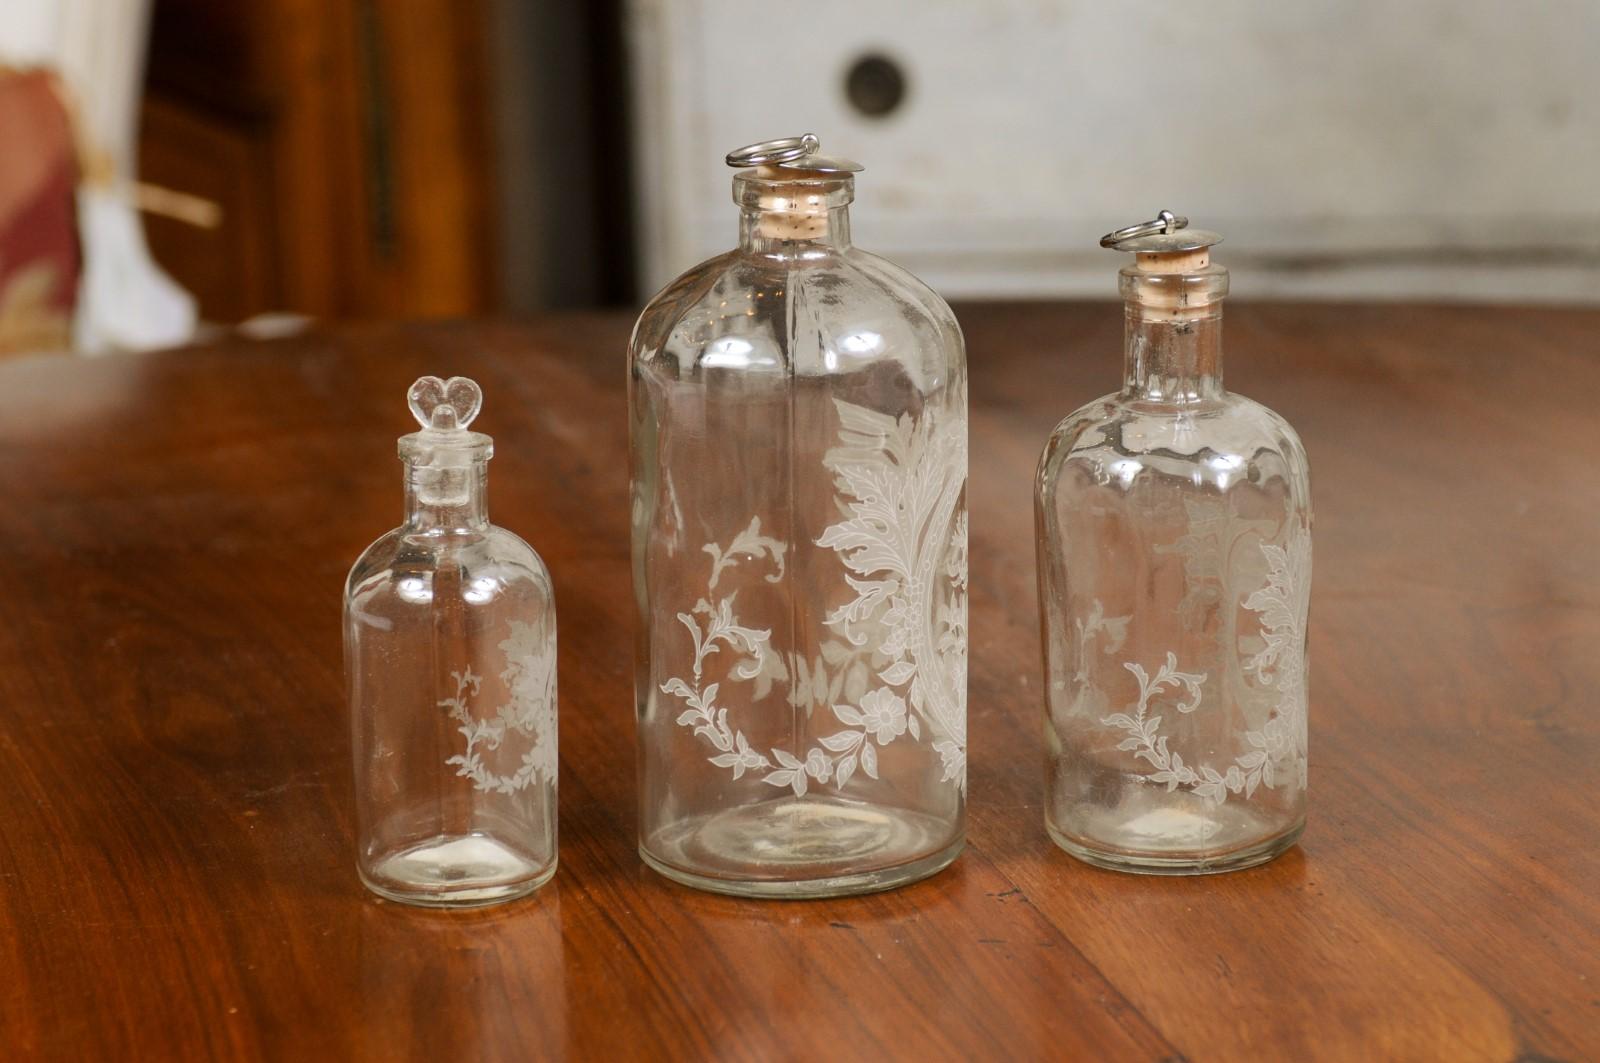 A set of three glass vanity bottles from the 19th century, with etched floral décor. Created in France during the 19th century, each of this set of three vanity bottles features an oblong body adorned with etched floral motifs. Oval medallions